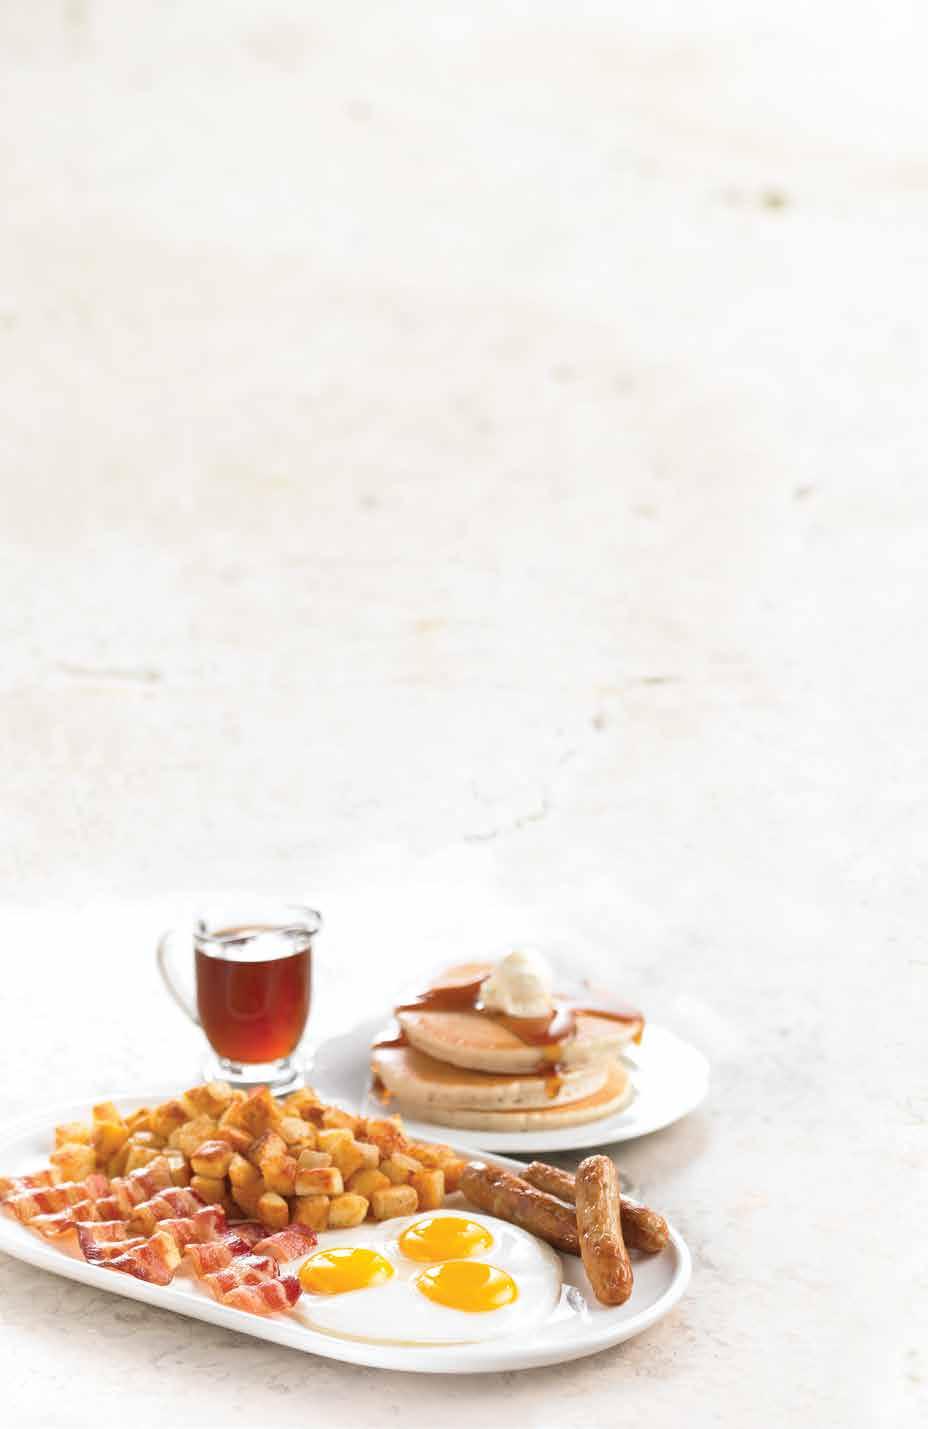 COCO S BREAKFAST SPECIAL A great way to start every day at a great price!